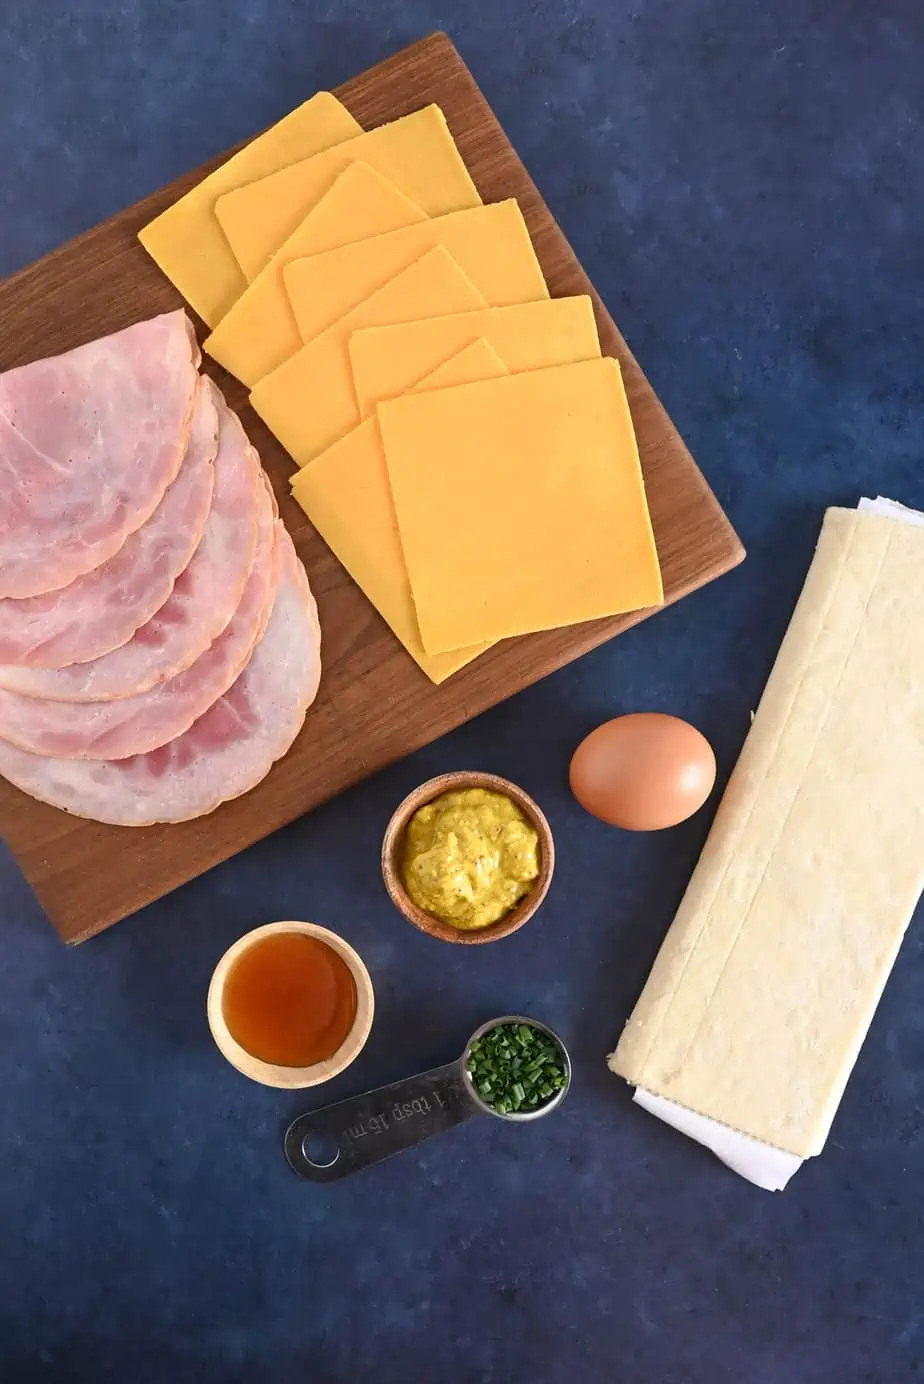 Ingredients for hot ham and cheese pinwheels arranged on a blue countertop.